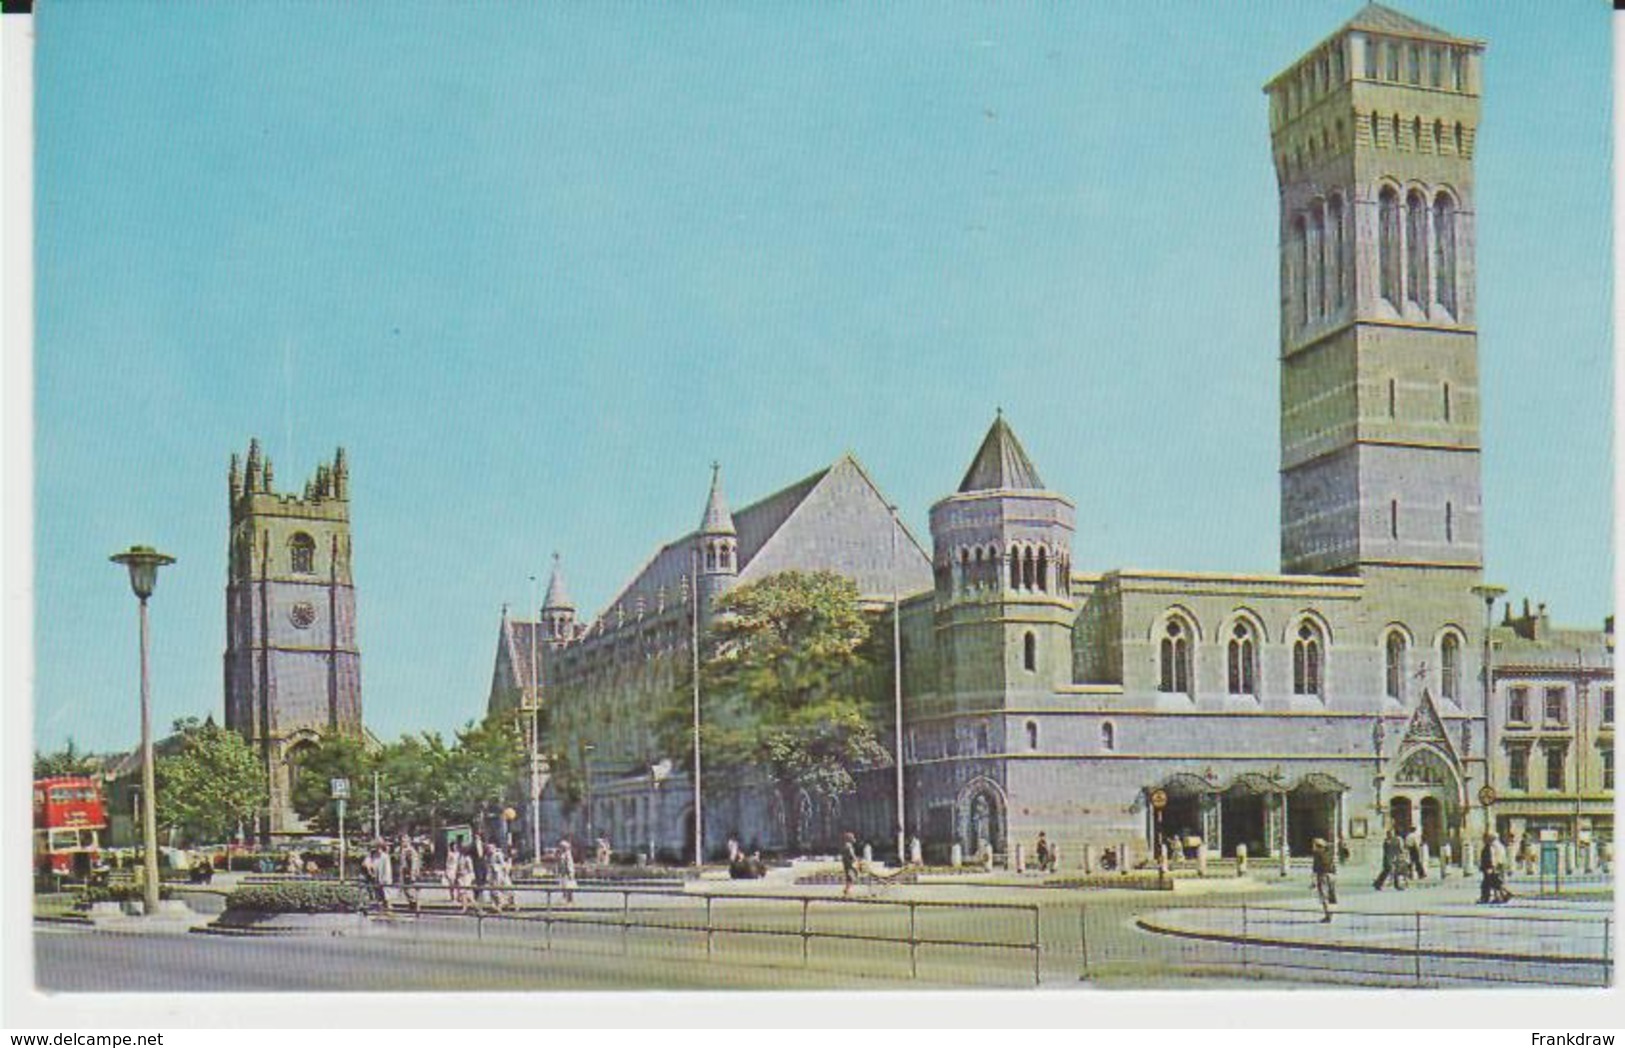 Postcard - St.Andrews Church And Guildhall Plymouth Card No Whs2703 - Unused Very Good - Unclassified